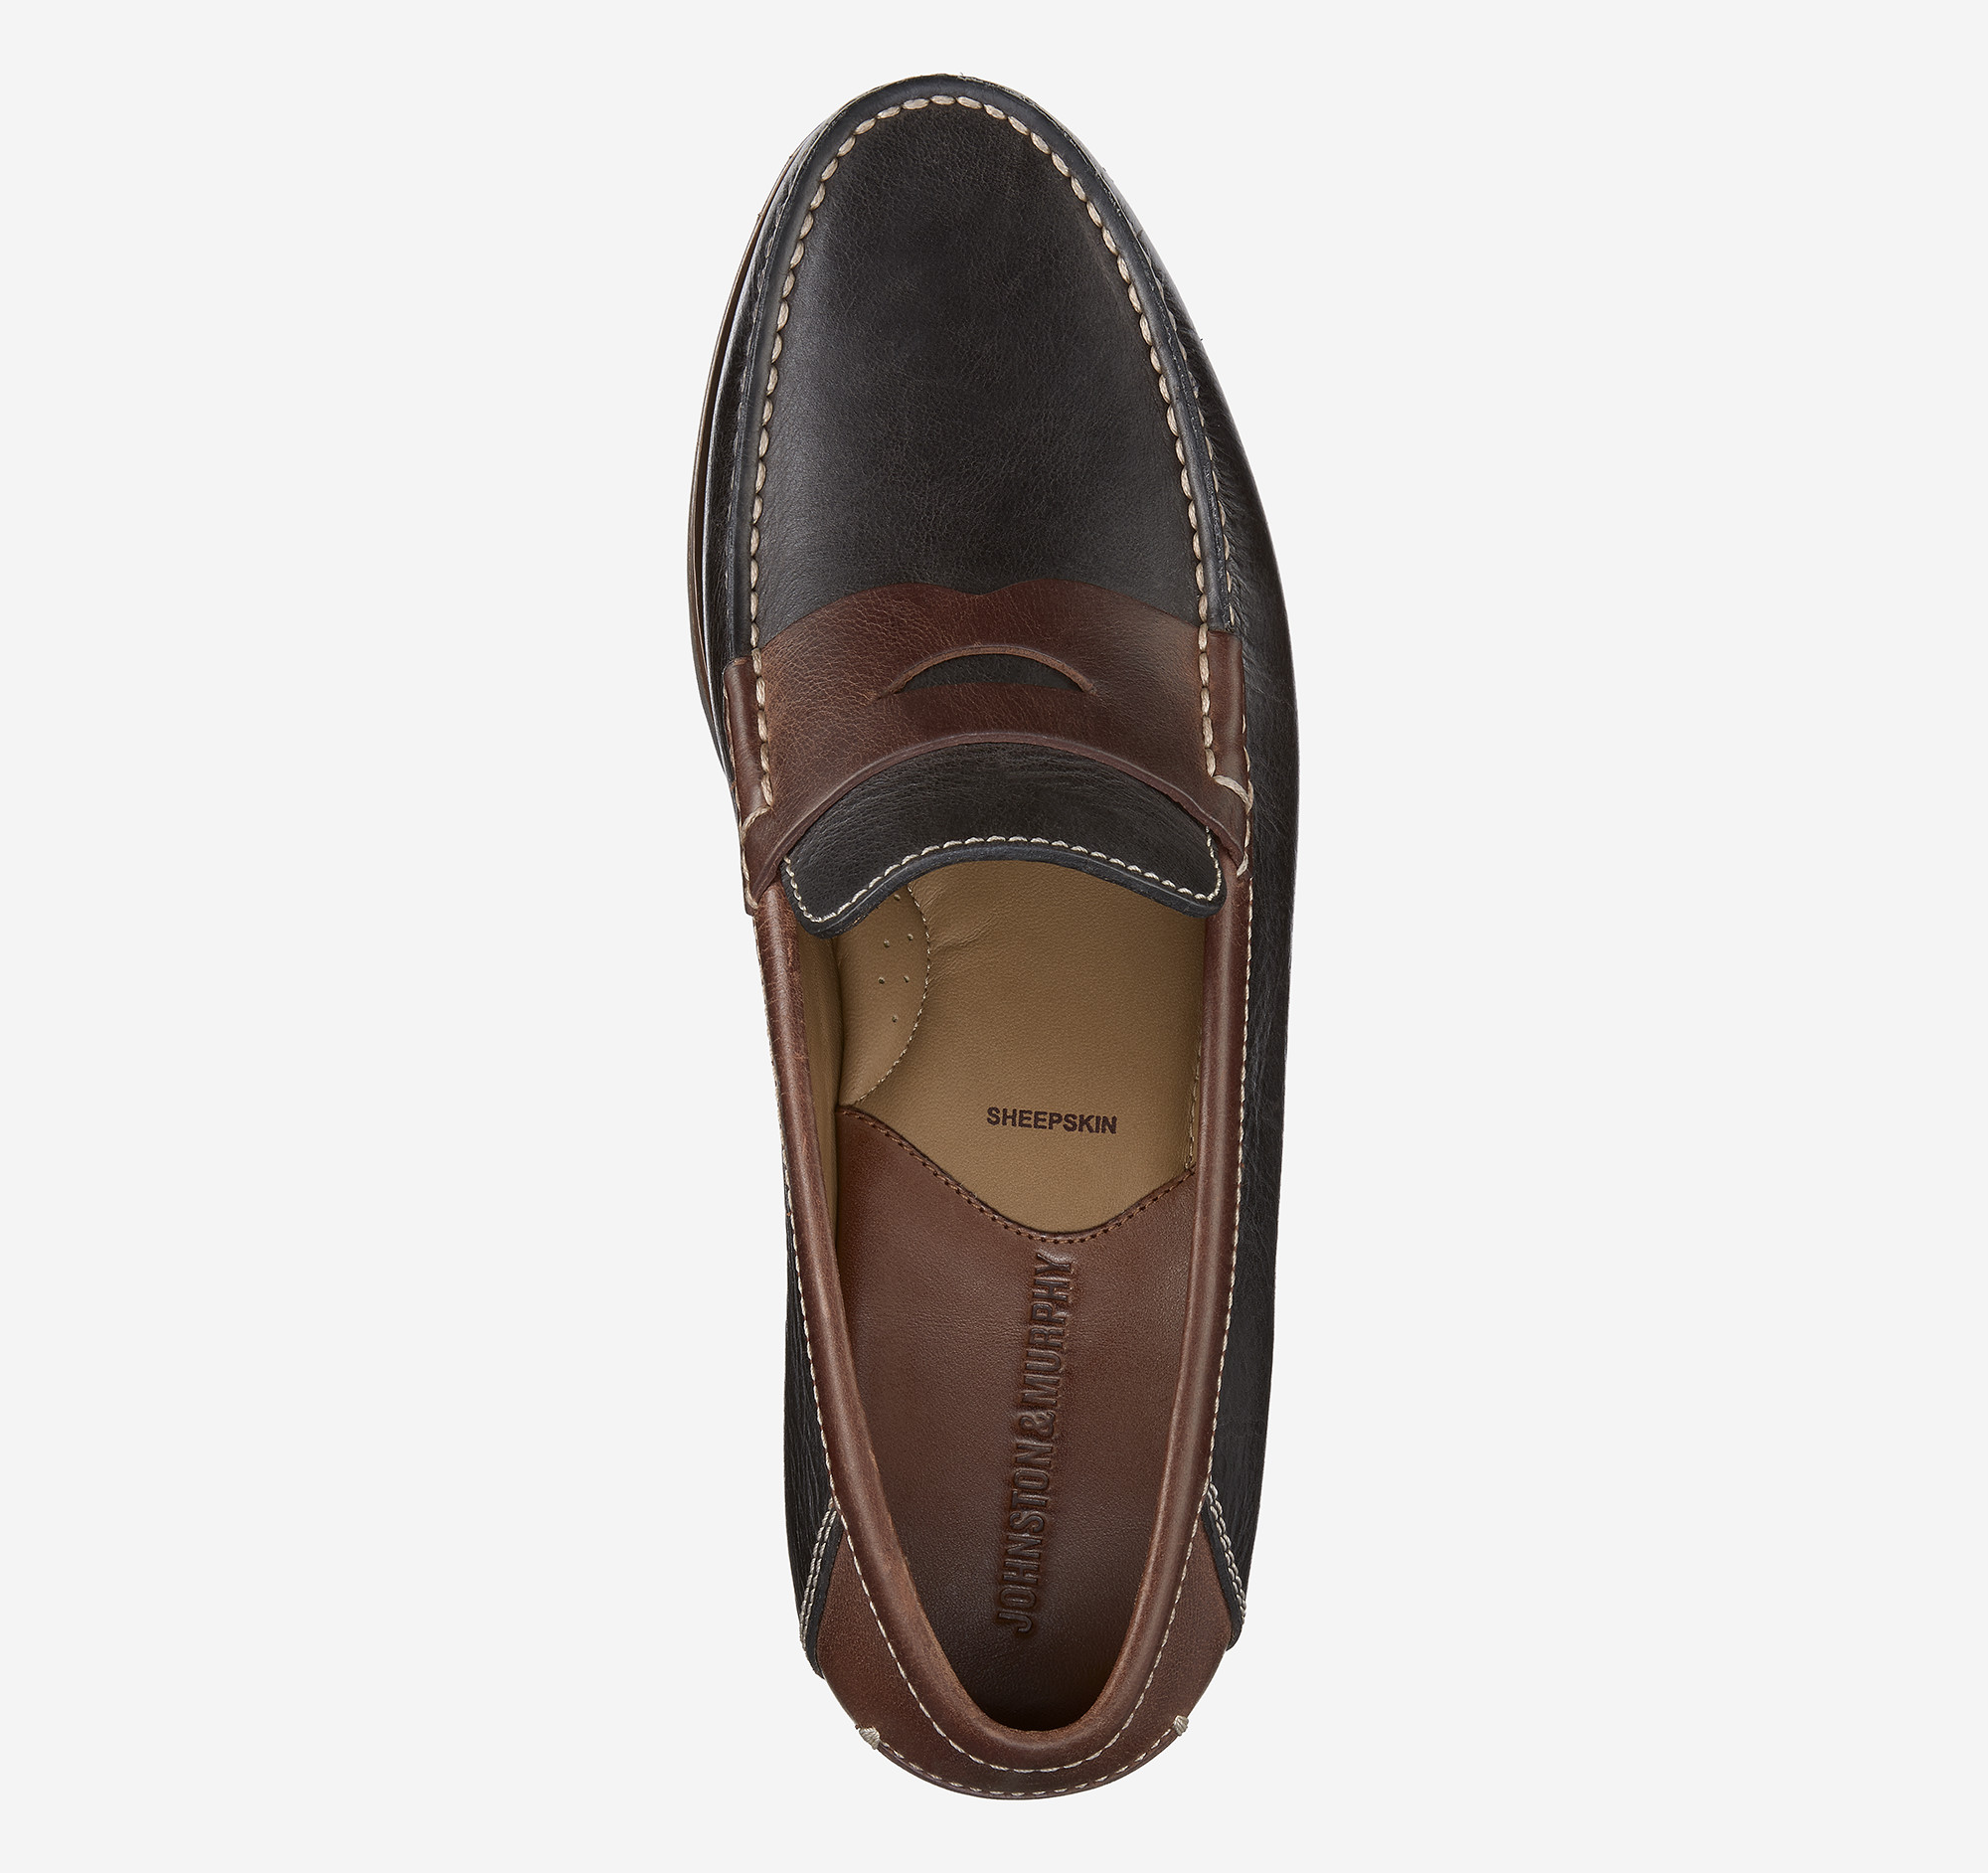 Men's Lincoln Penny Loafer In Brown 'Rich Mahogany' Leather - Thursday